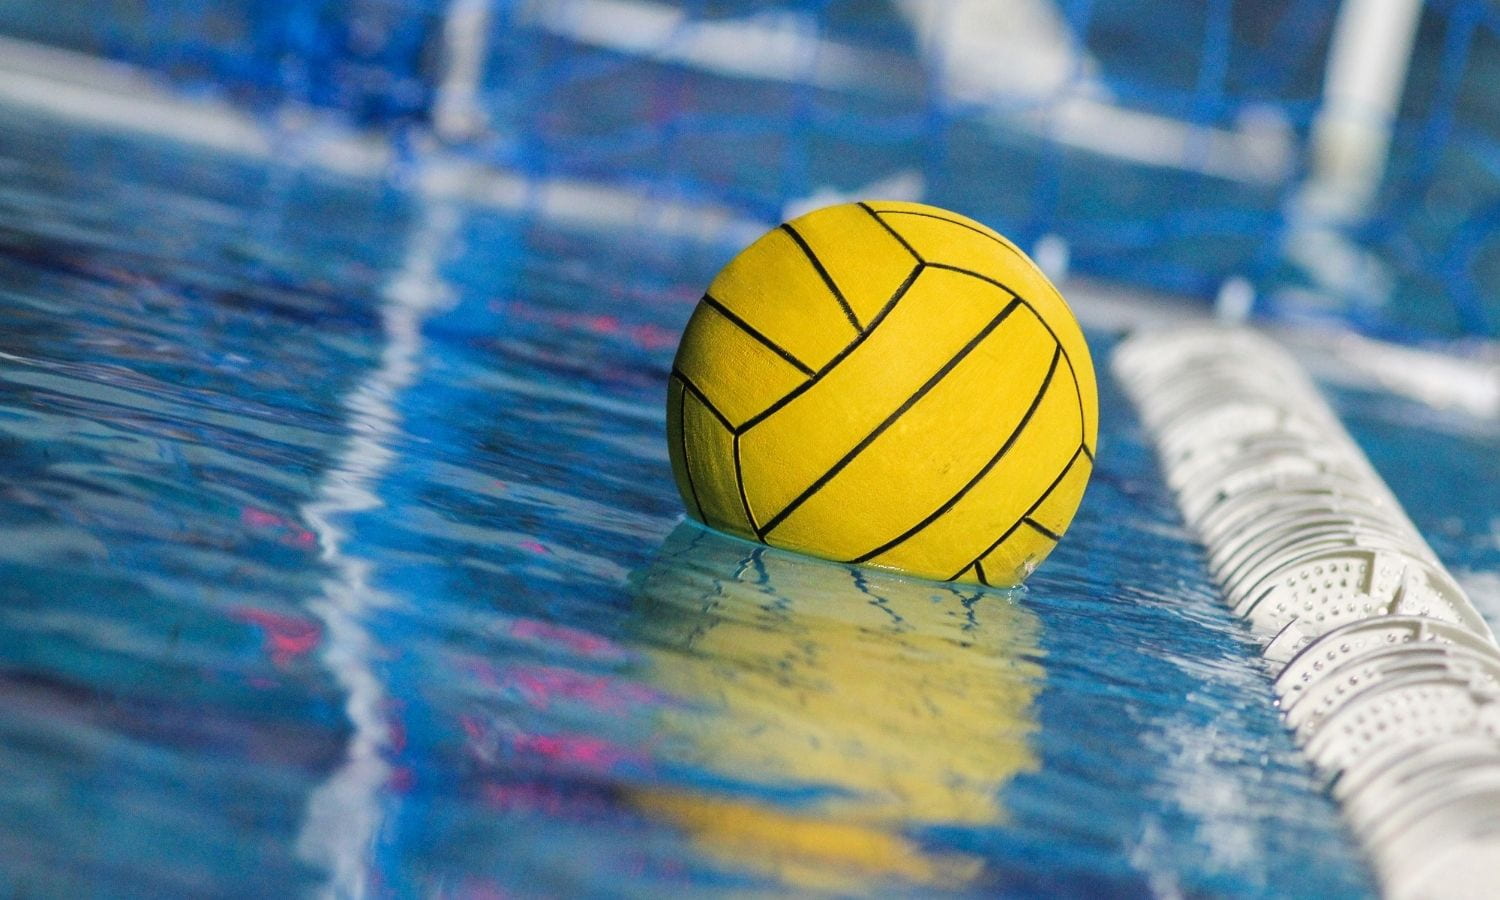 Round Rock ISD adds Water Polo as sport for 2022-2023 school year - Round Rock ISD News